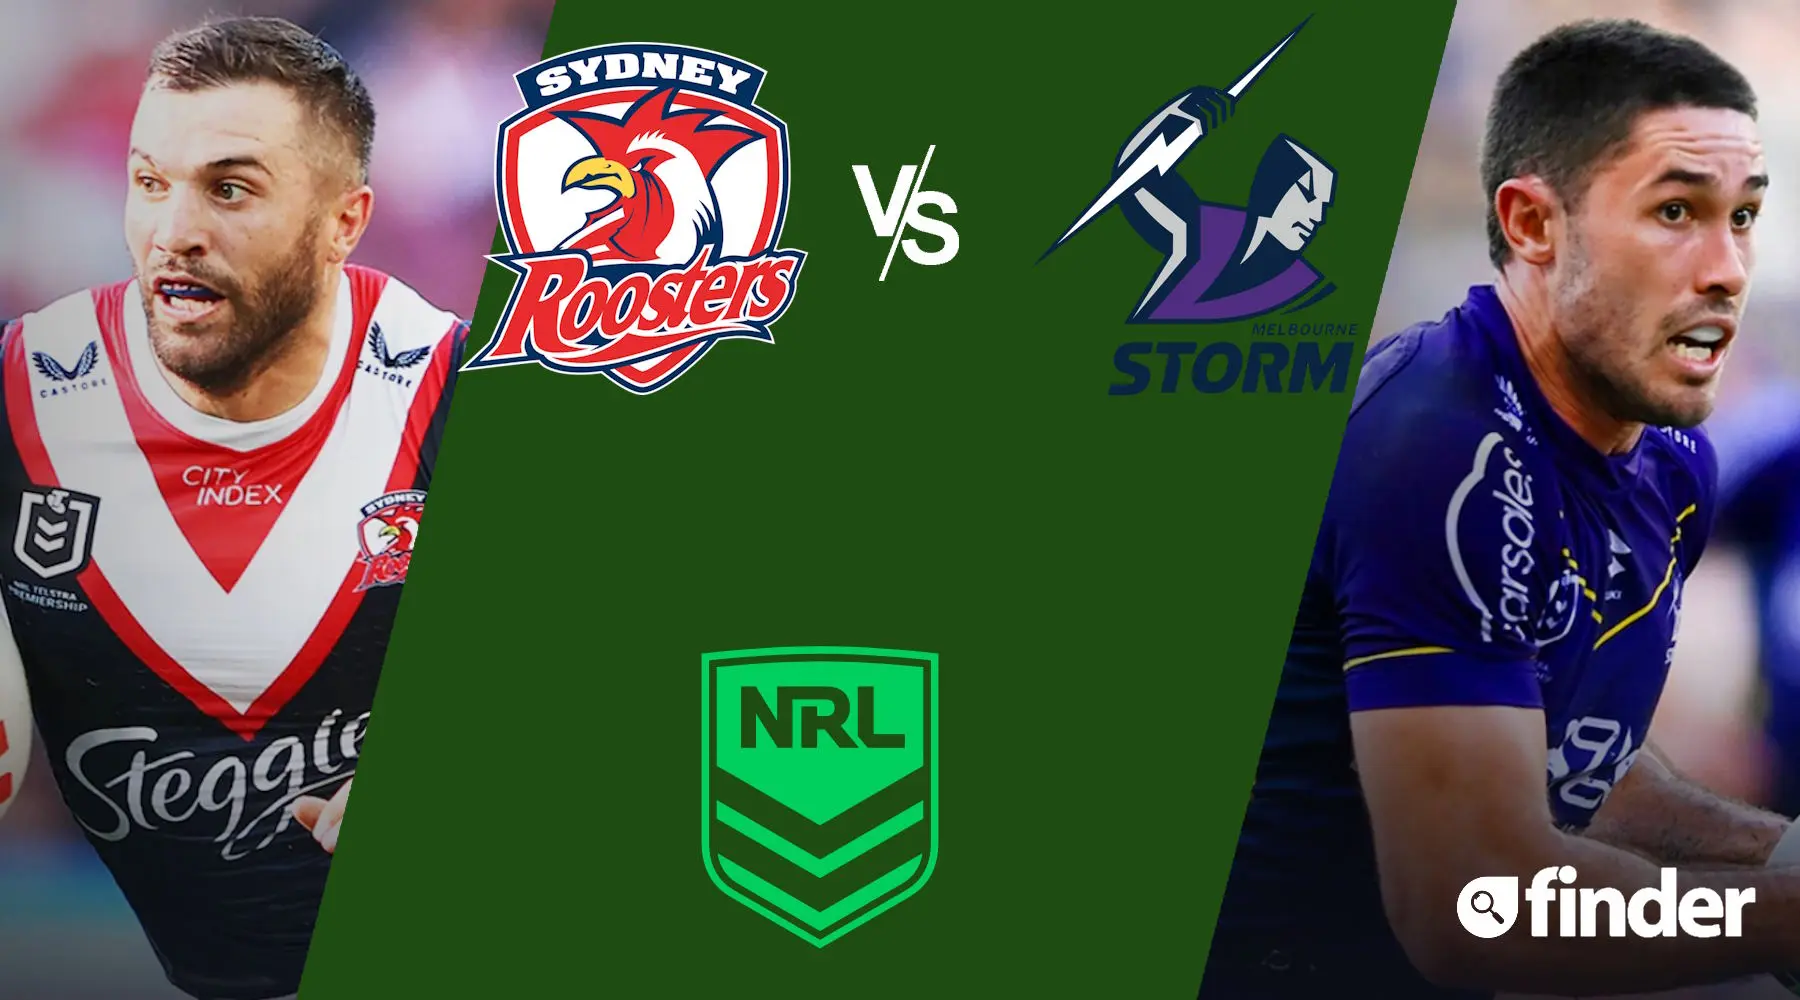 How to watch Roosters vs Storm NRL live and match preview